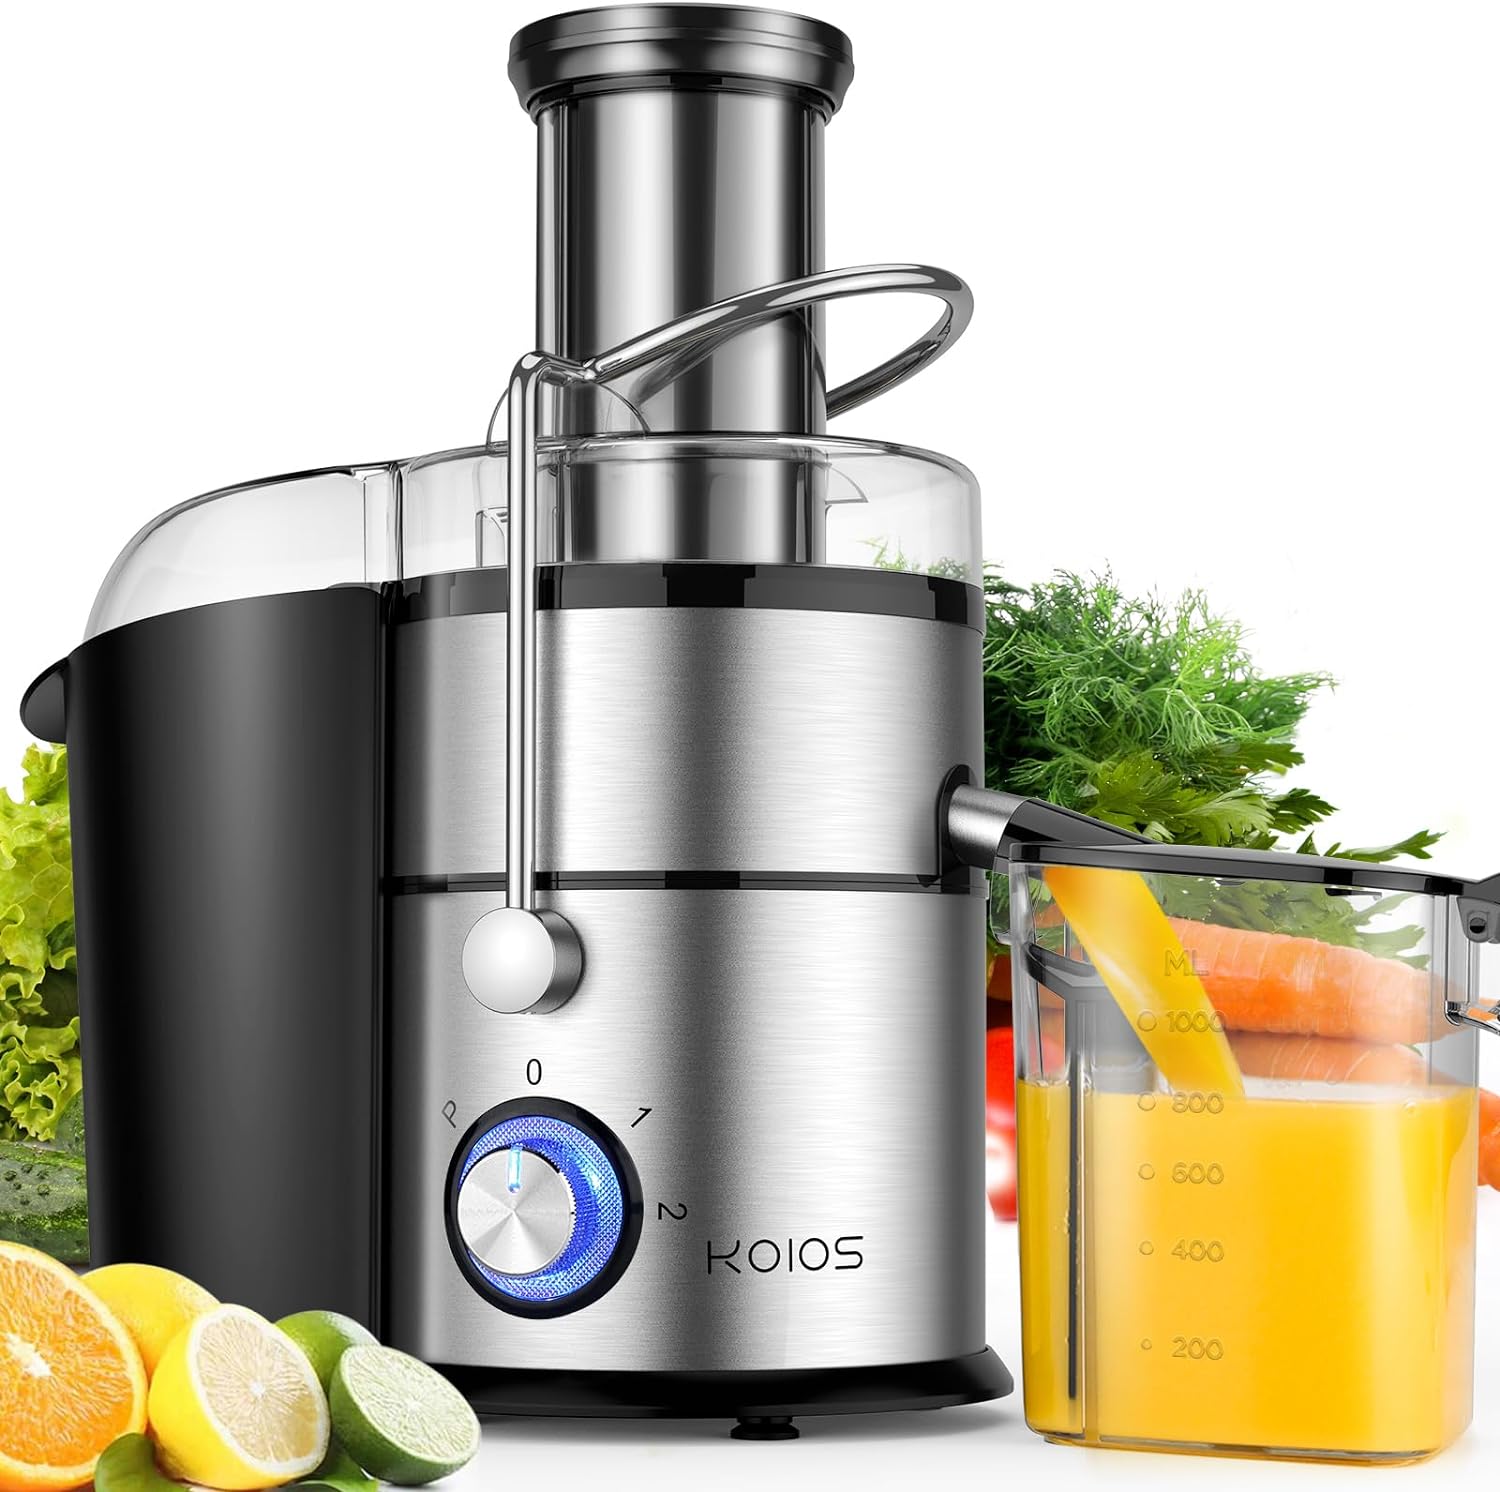 Last Chance! Flash Sale Alert! 1300W KOIOS Centrifugal Juicer - Only $87.19!